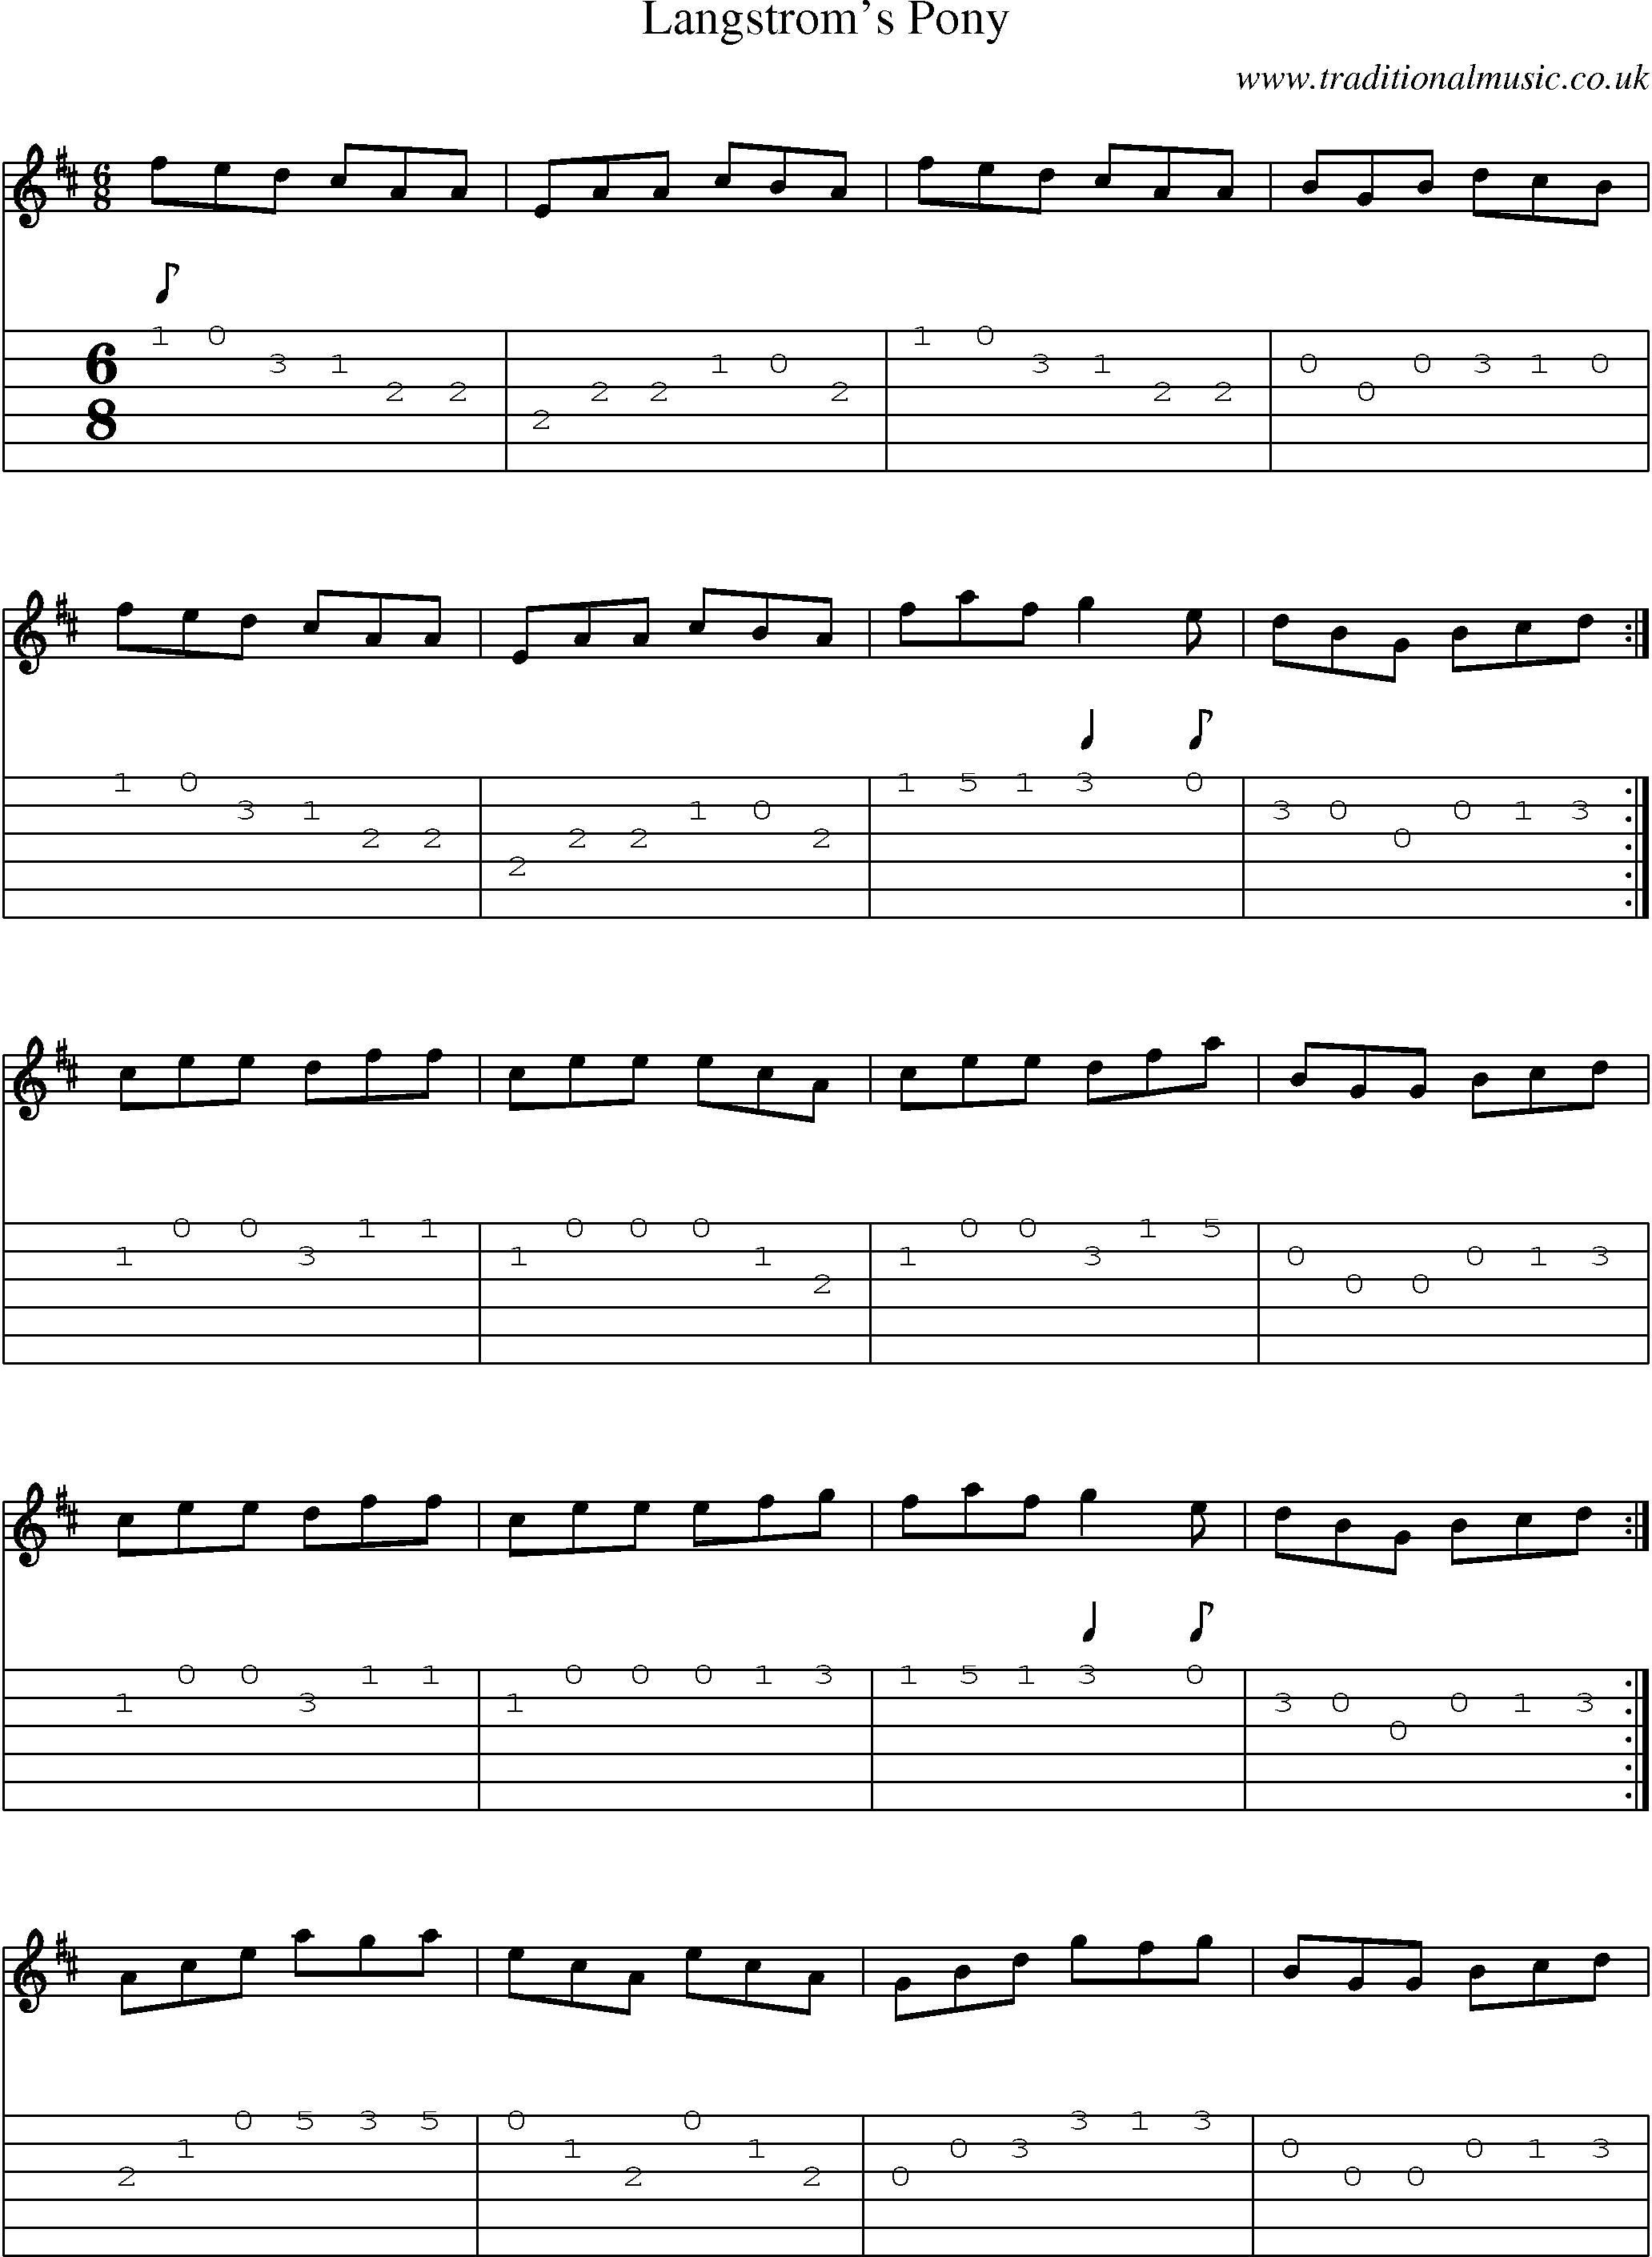 Music Score and Guitar Tabs for Langstroms Pony